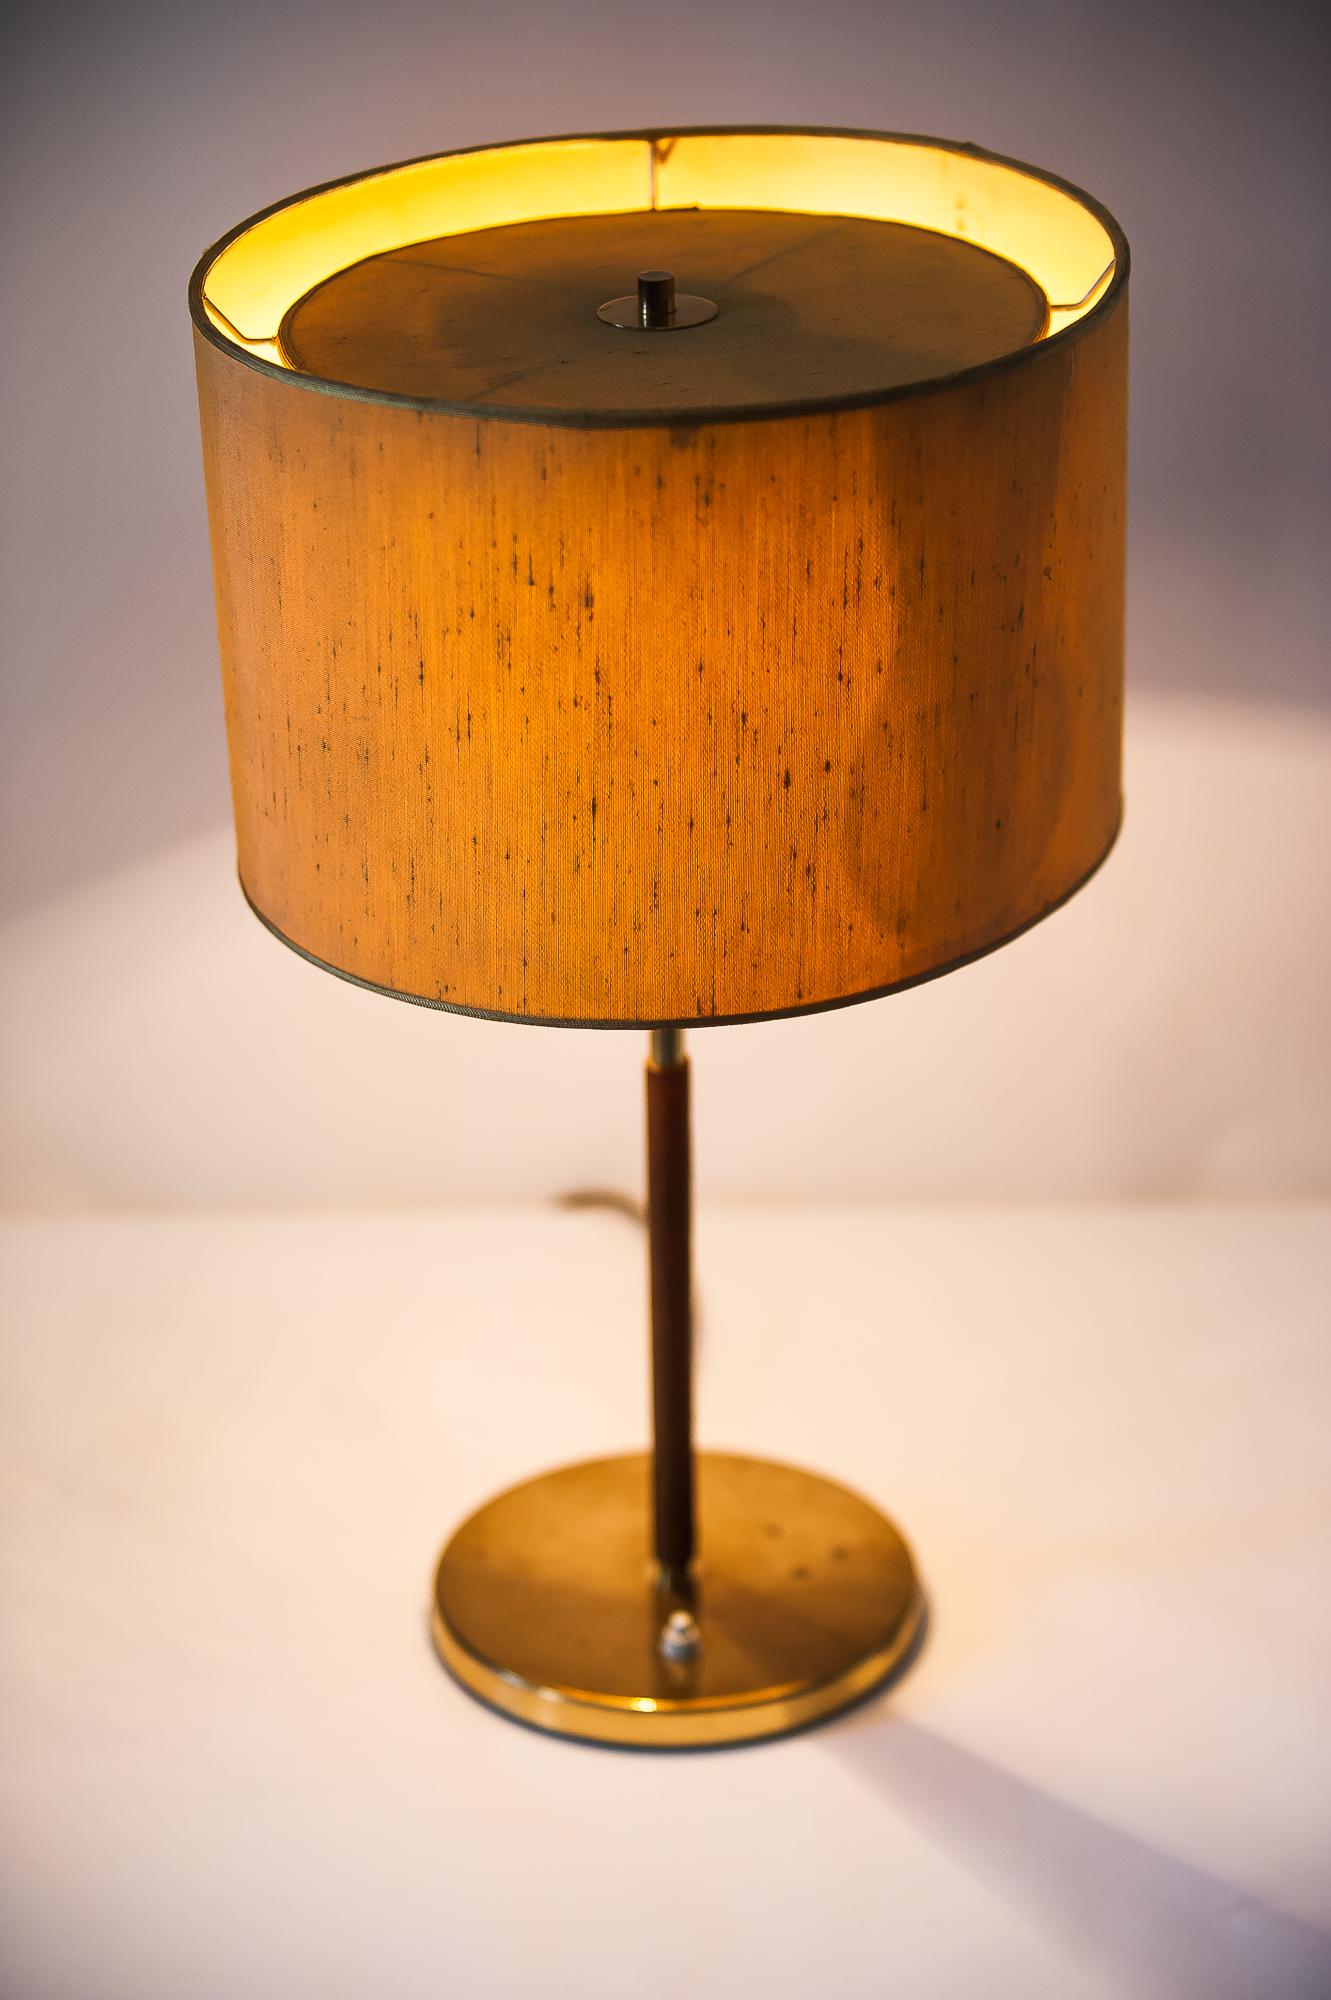 Kalmar Table Lamps with Leather Covered Stem and Yellow Shade, Austria, 1950s (Mitte des 20. Jahrhunderts)